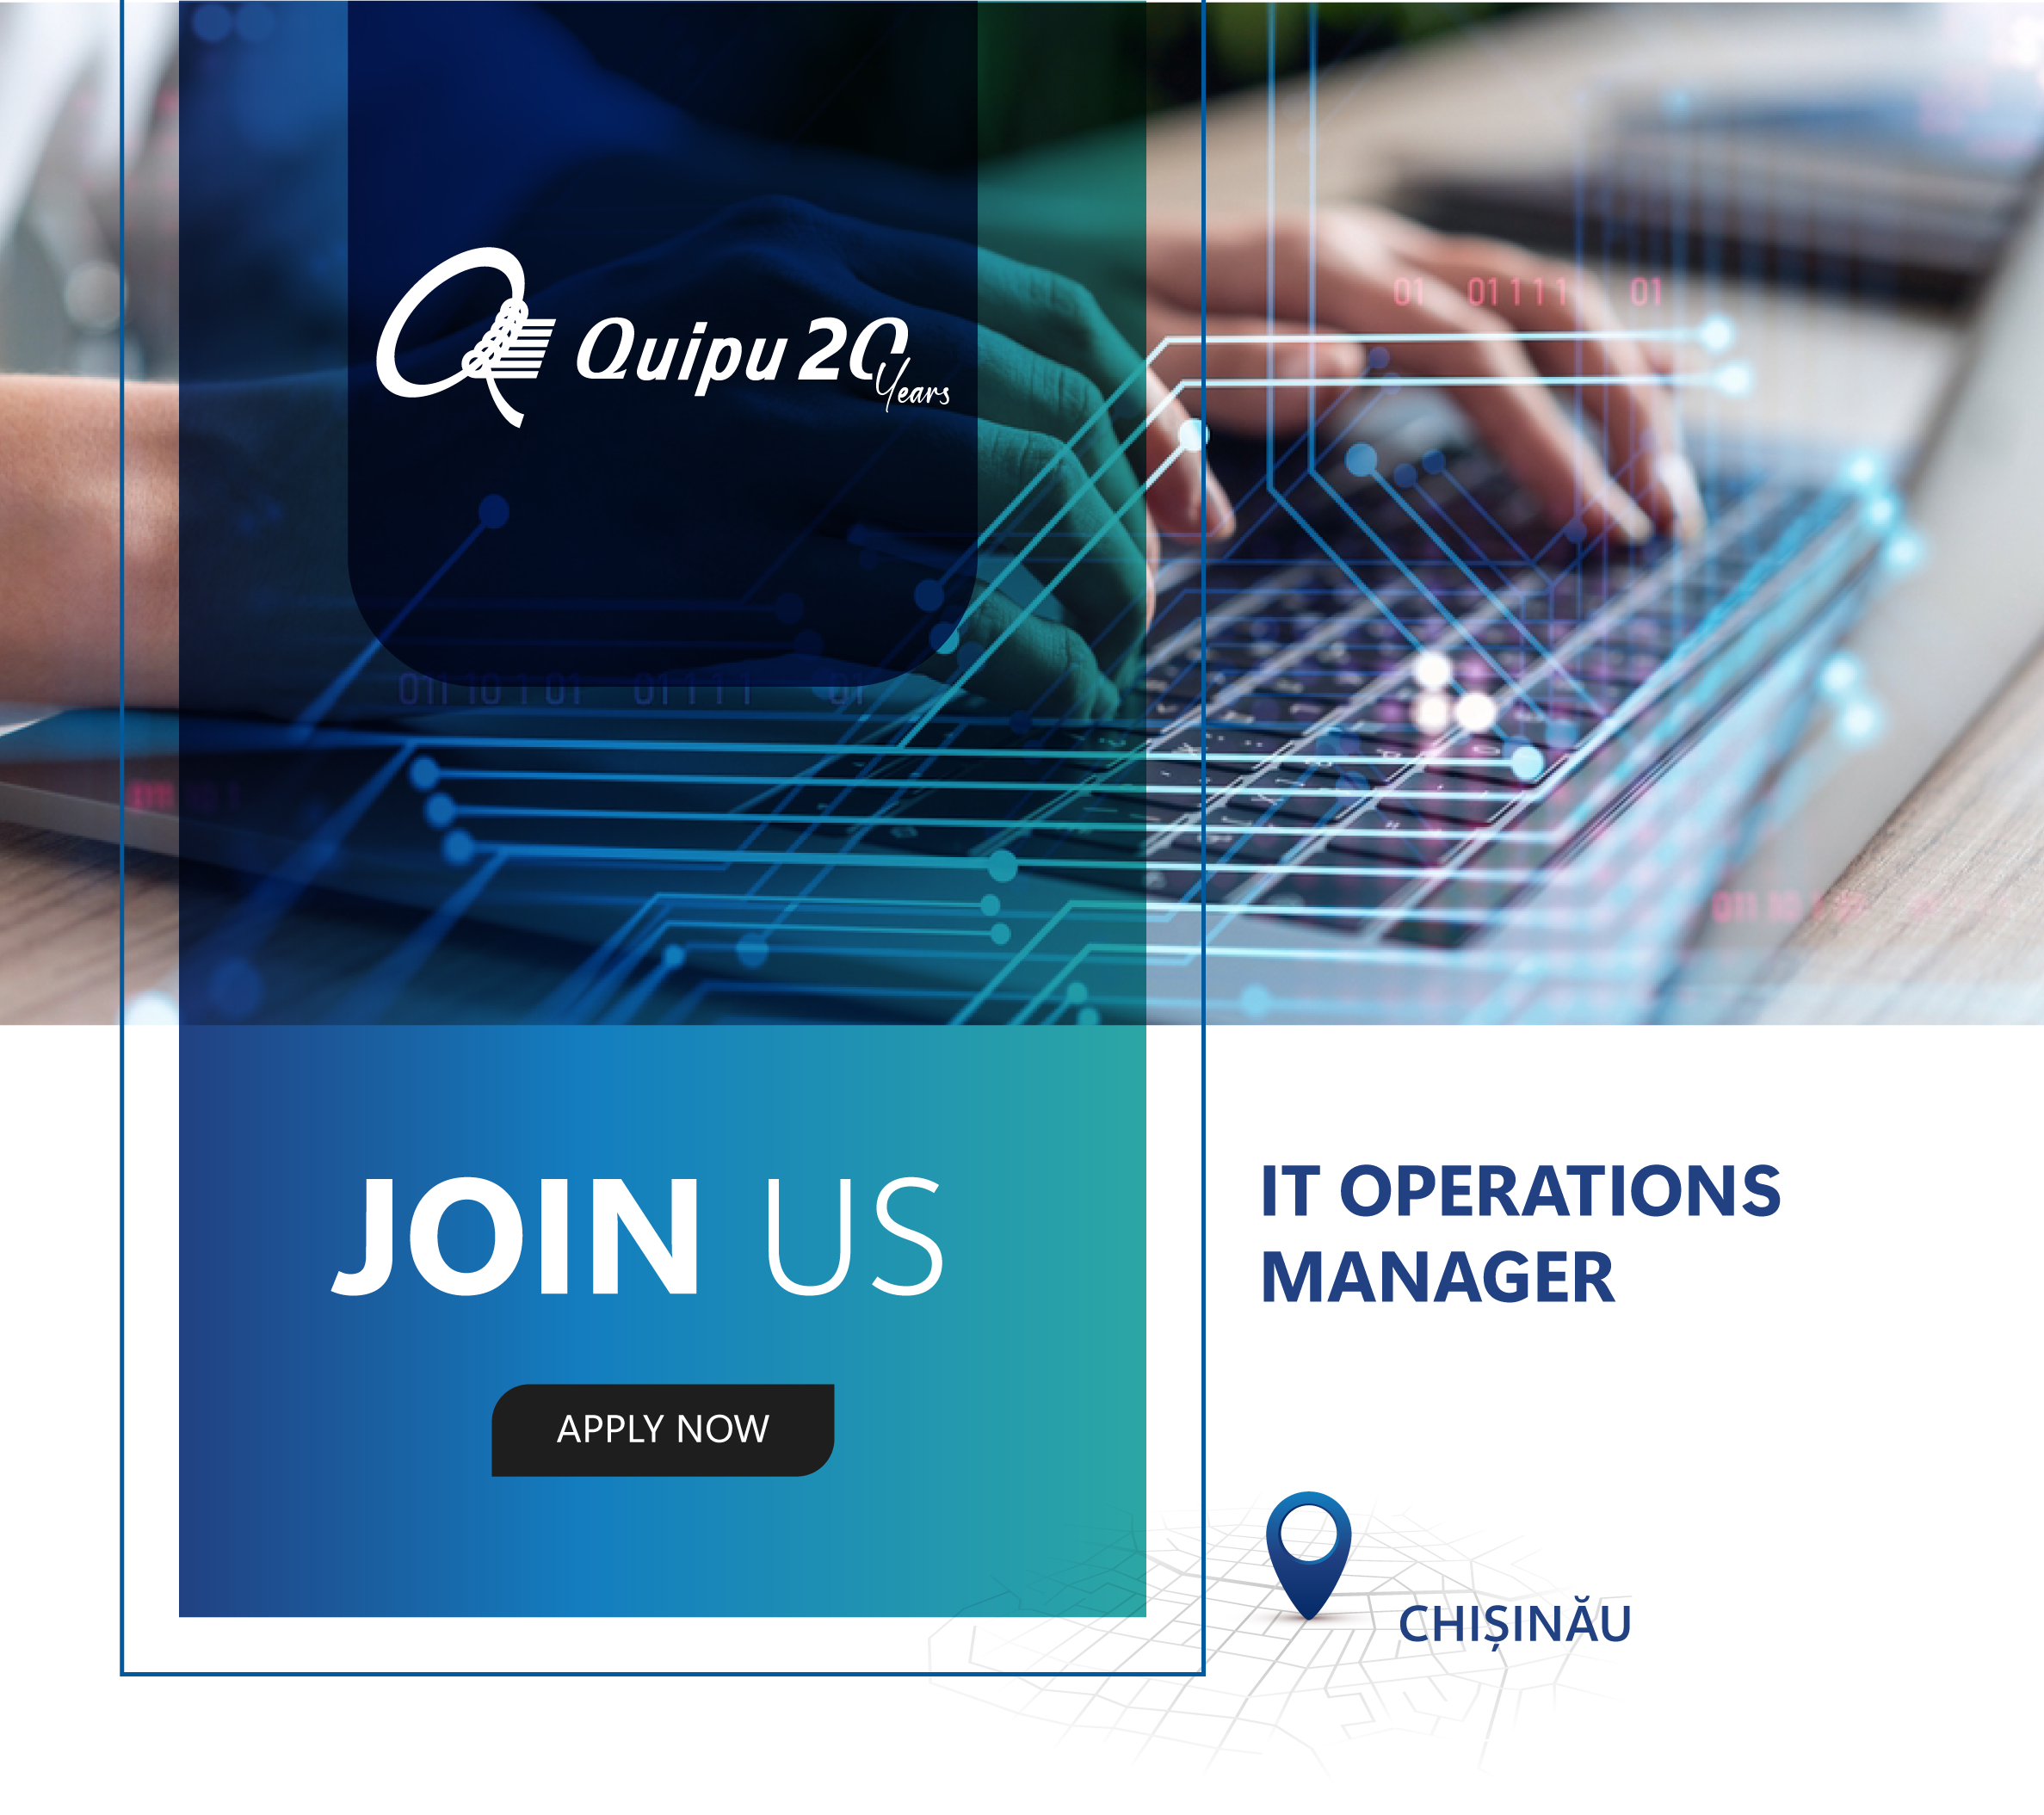 IT Operations Manager – Chisinau